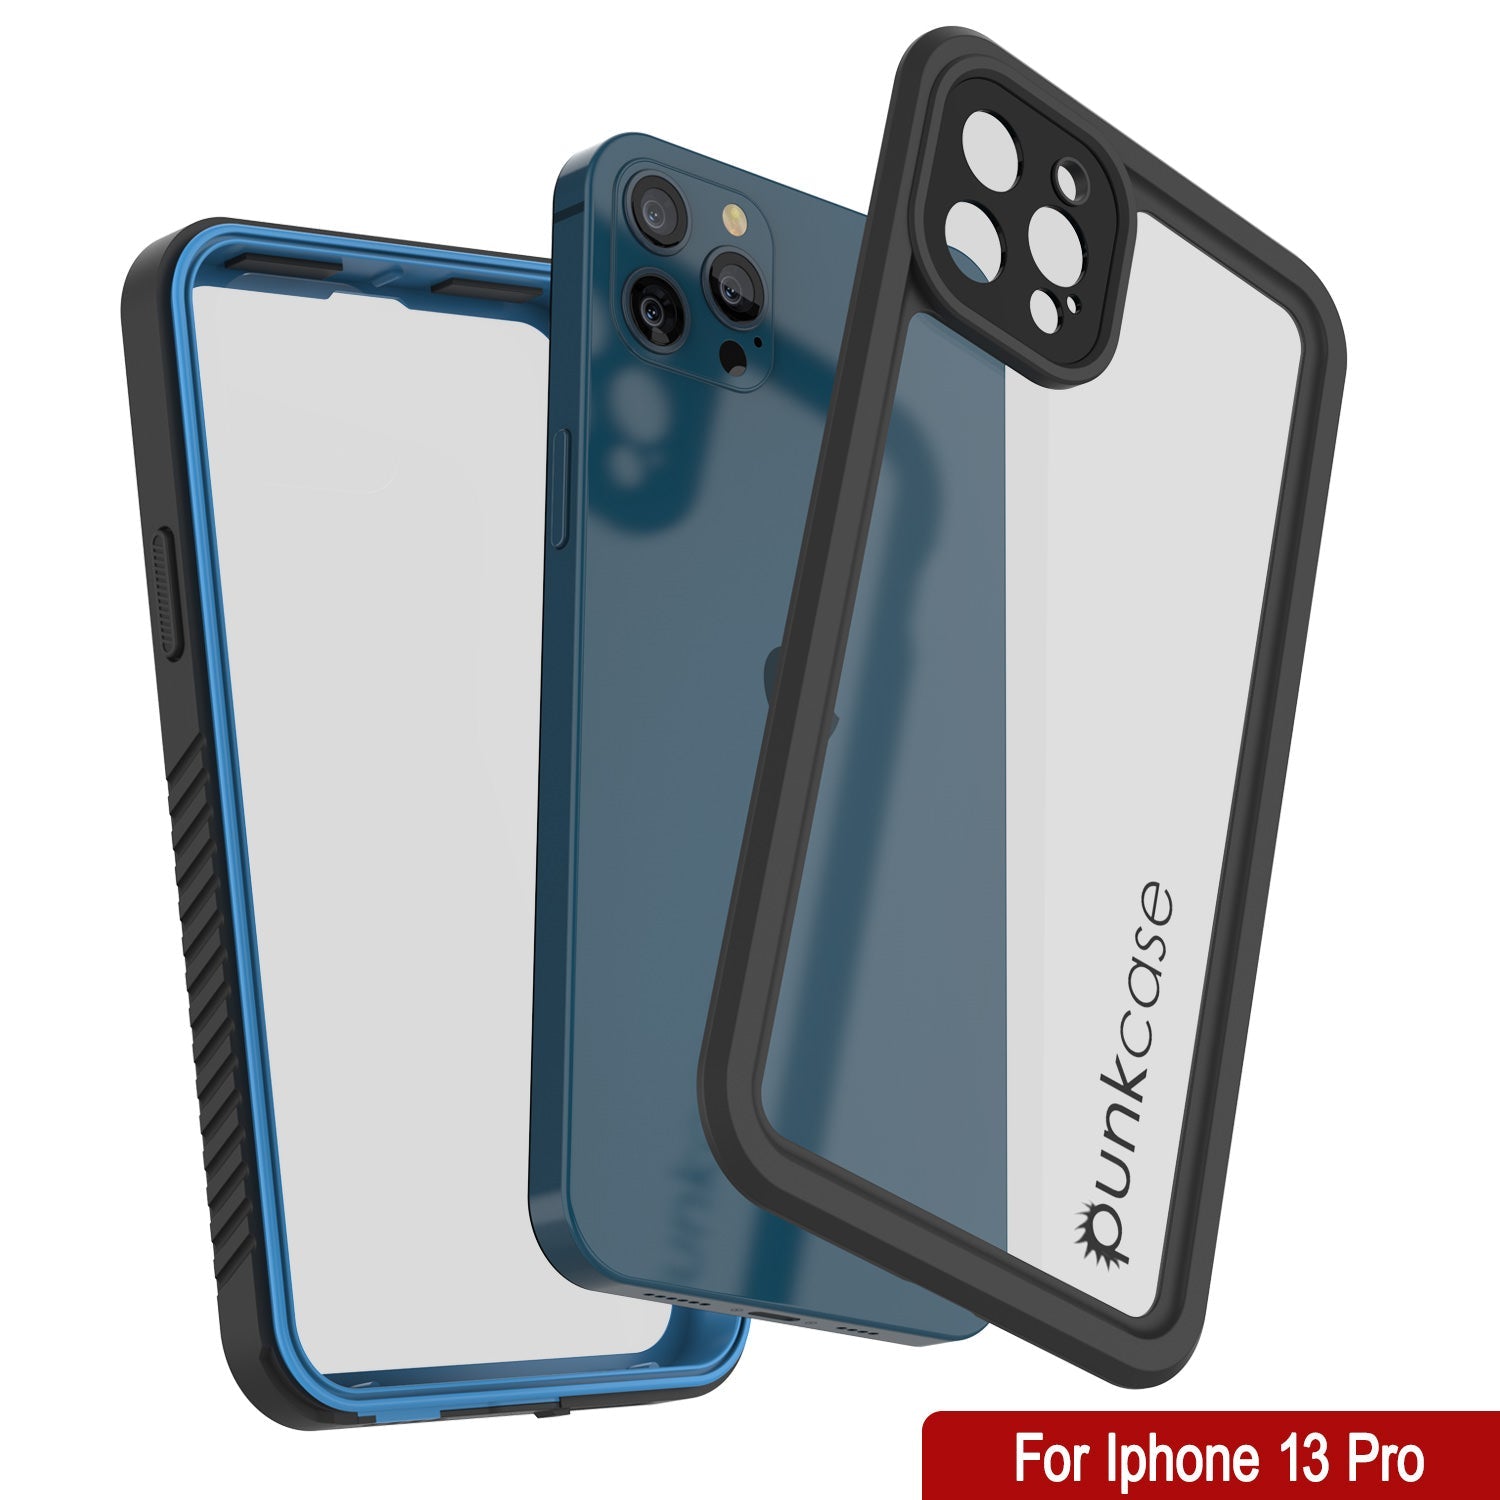 iPhone 13 Pro  Waterproof Case, Punkcase [Extreme Series] Armor Cover W/ Built In Screen Protector [Light Blue]